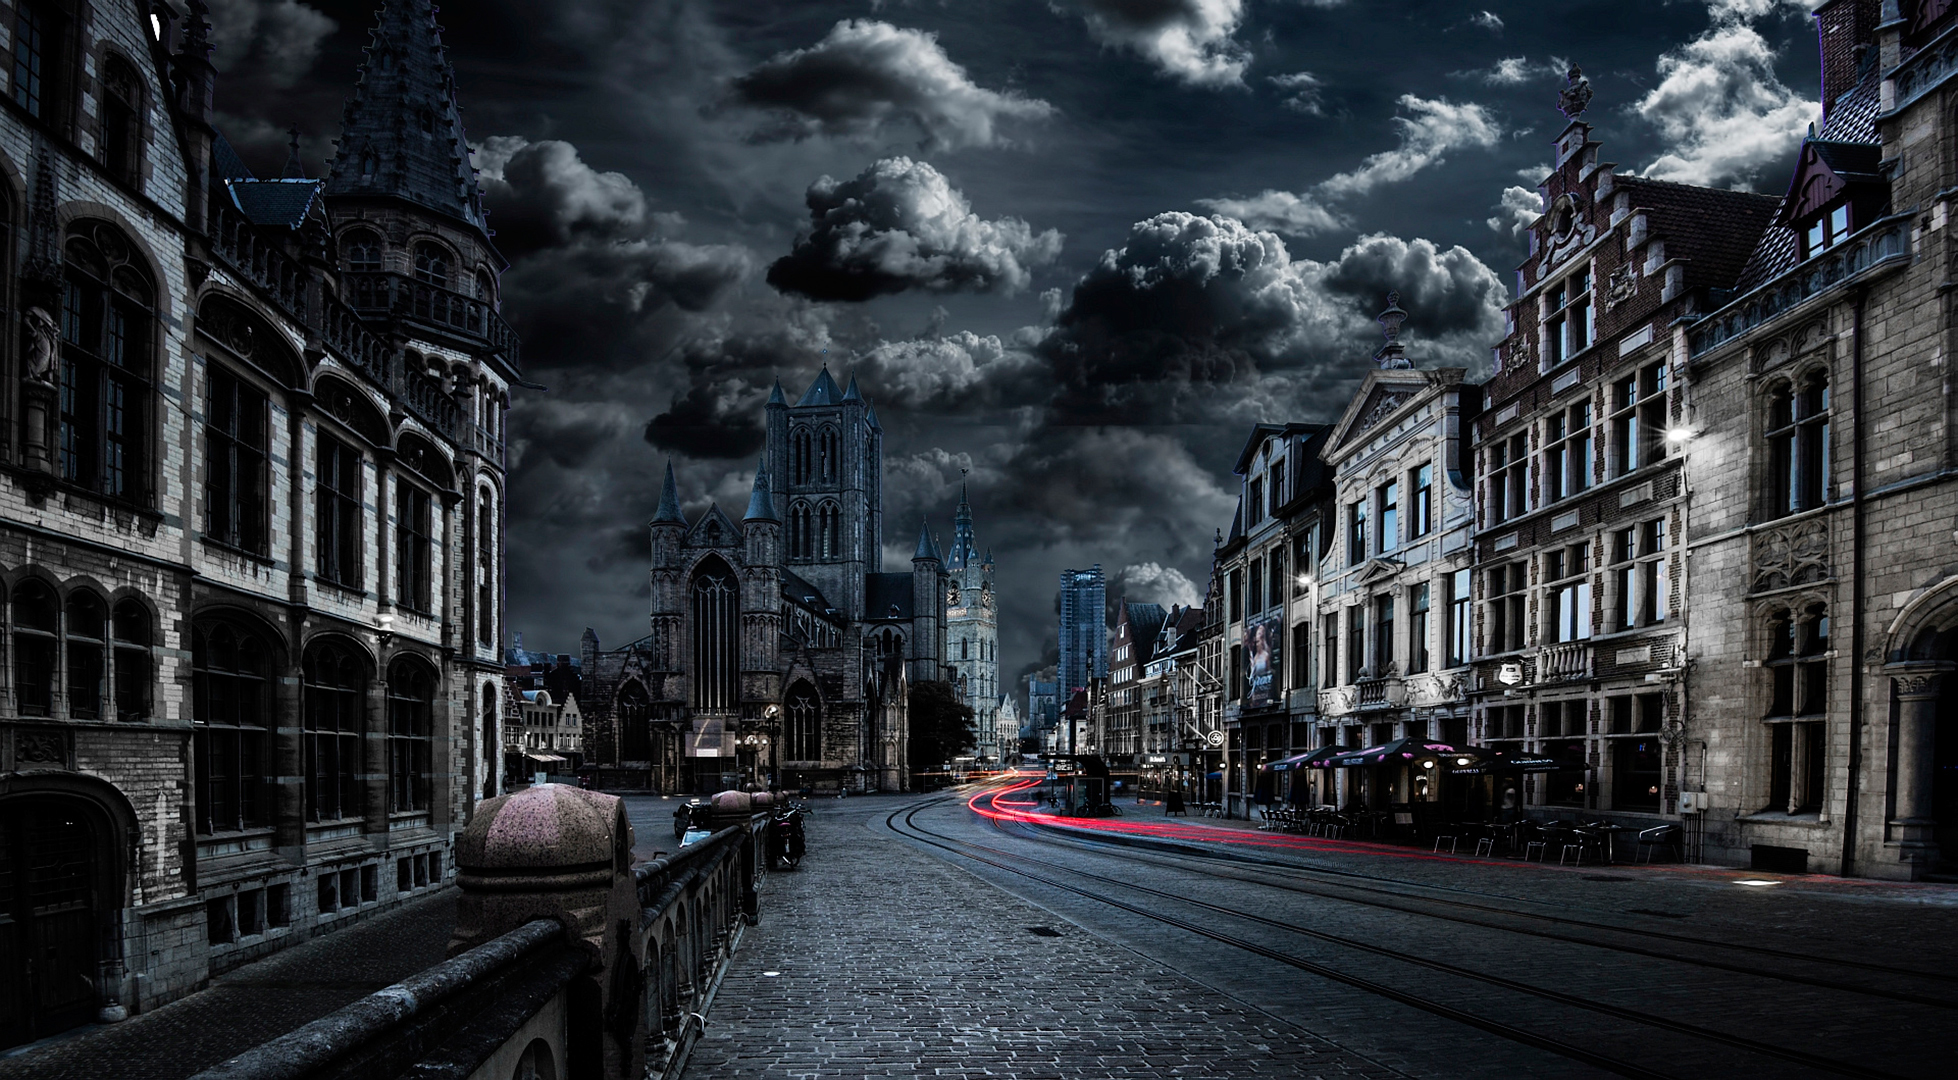 man made, ghent, architecture, building, city, cloud, night